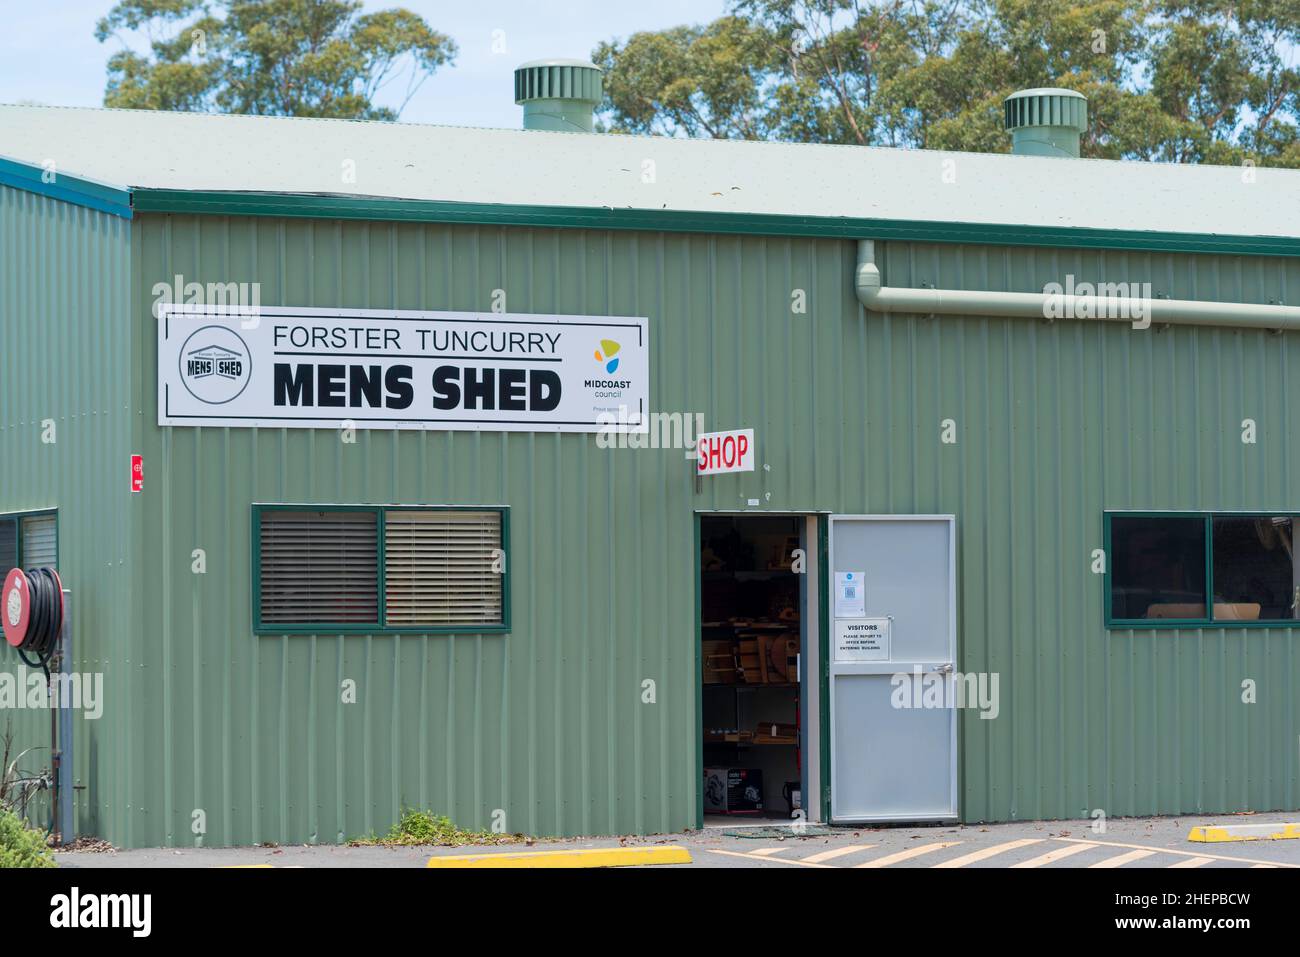 Der Wallis Lake Men's Shed in Tunchrys an der Mid North Coast von New South Wales ist Mitglied der 900 Strong, Australian Men's Shed Association Stockfoto